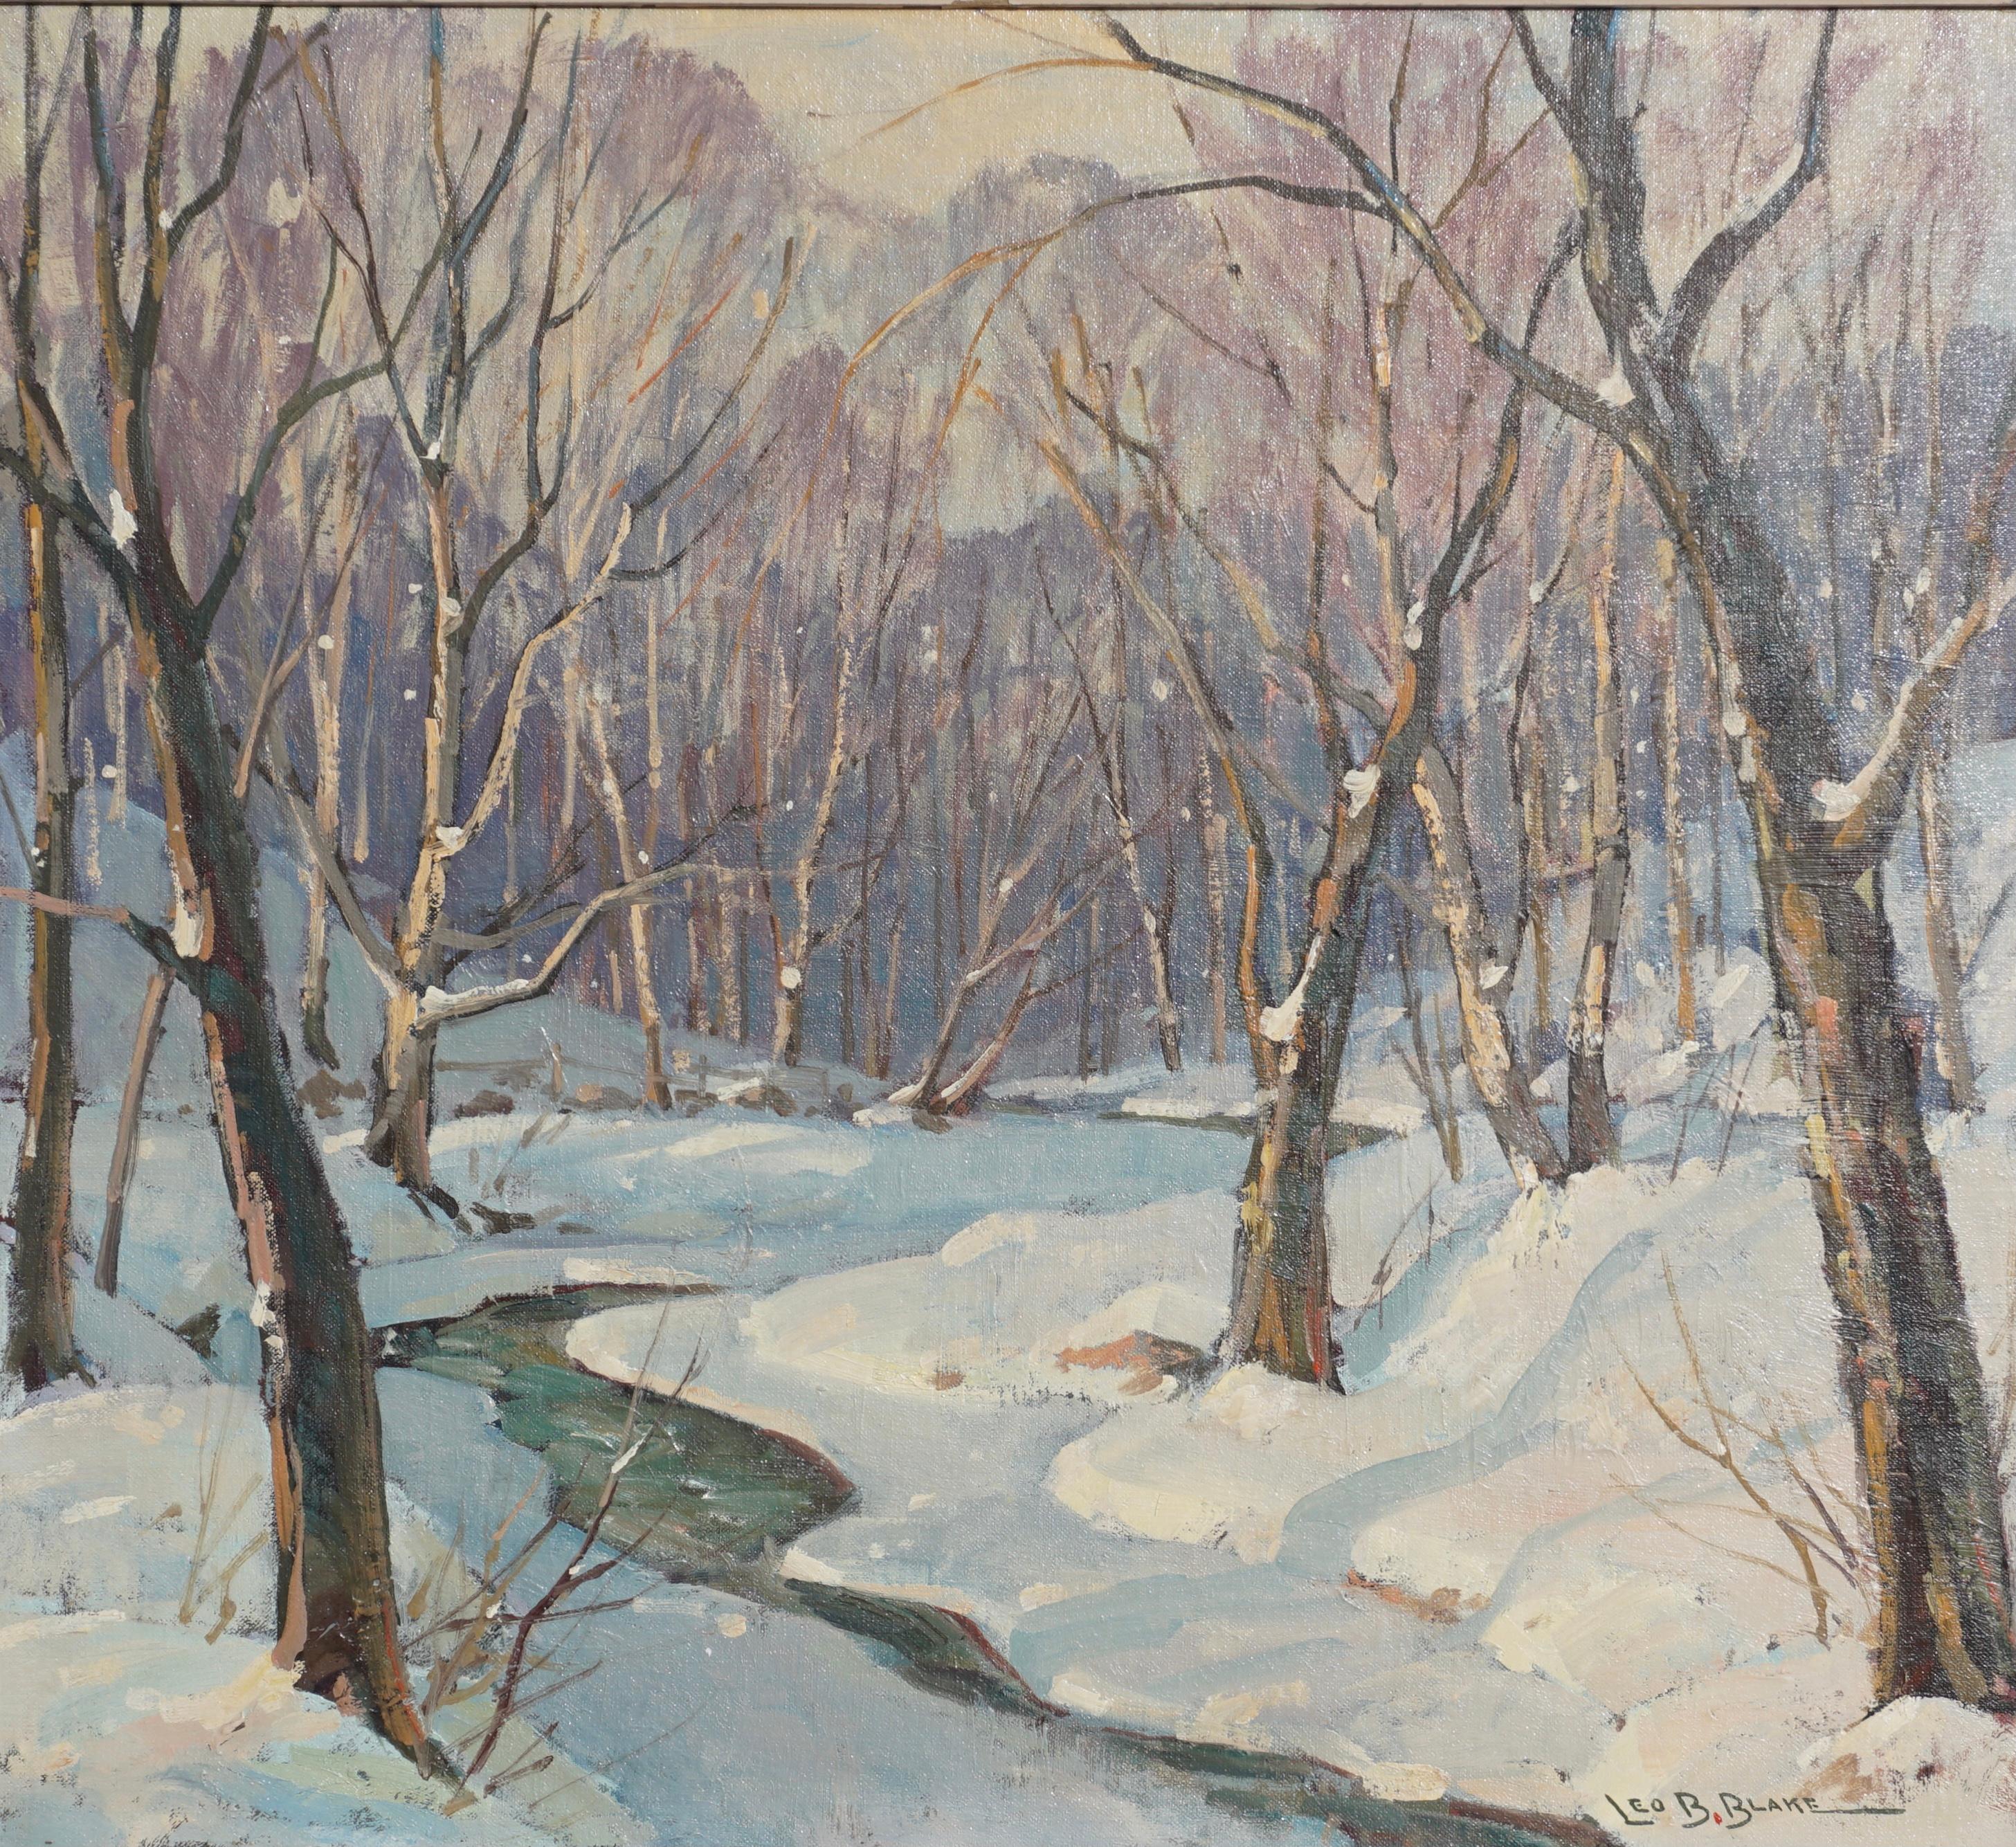 Winter Stream, New England, Impressionist Leo B. Blake. This winter snow river and birch tree landscape scene is reminiscent of Gruppe’s Vermont or New Hampshire pieces. The white snow is piled high and fresh with overcast skies over the